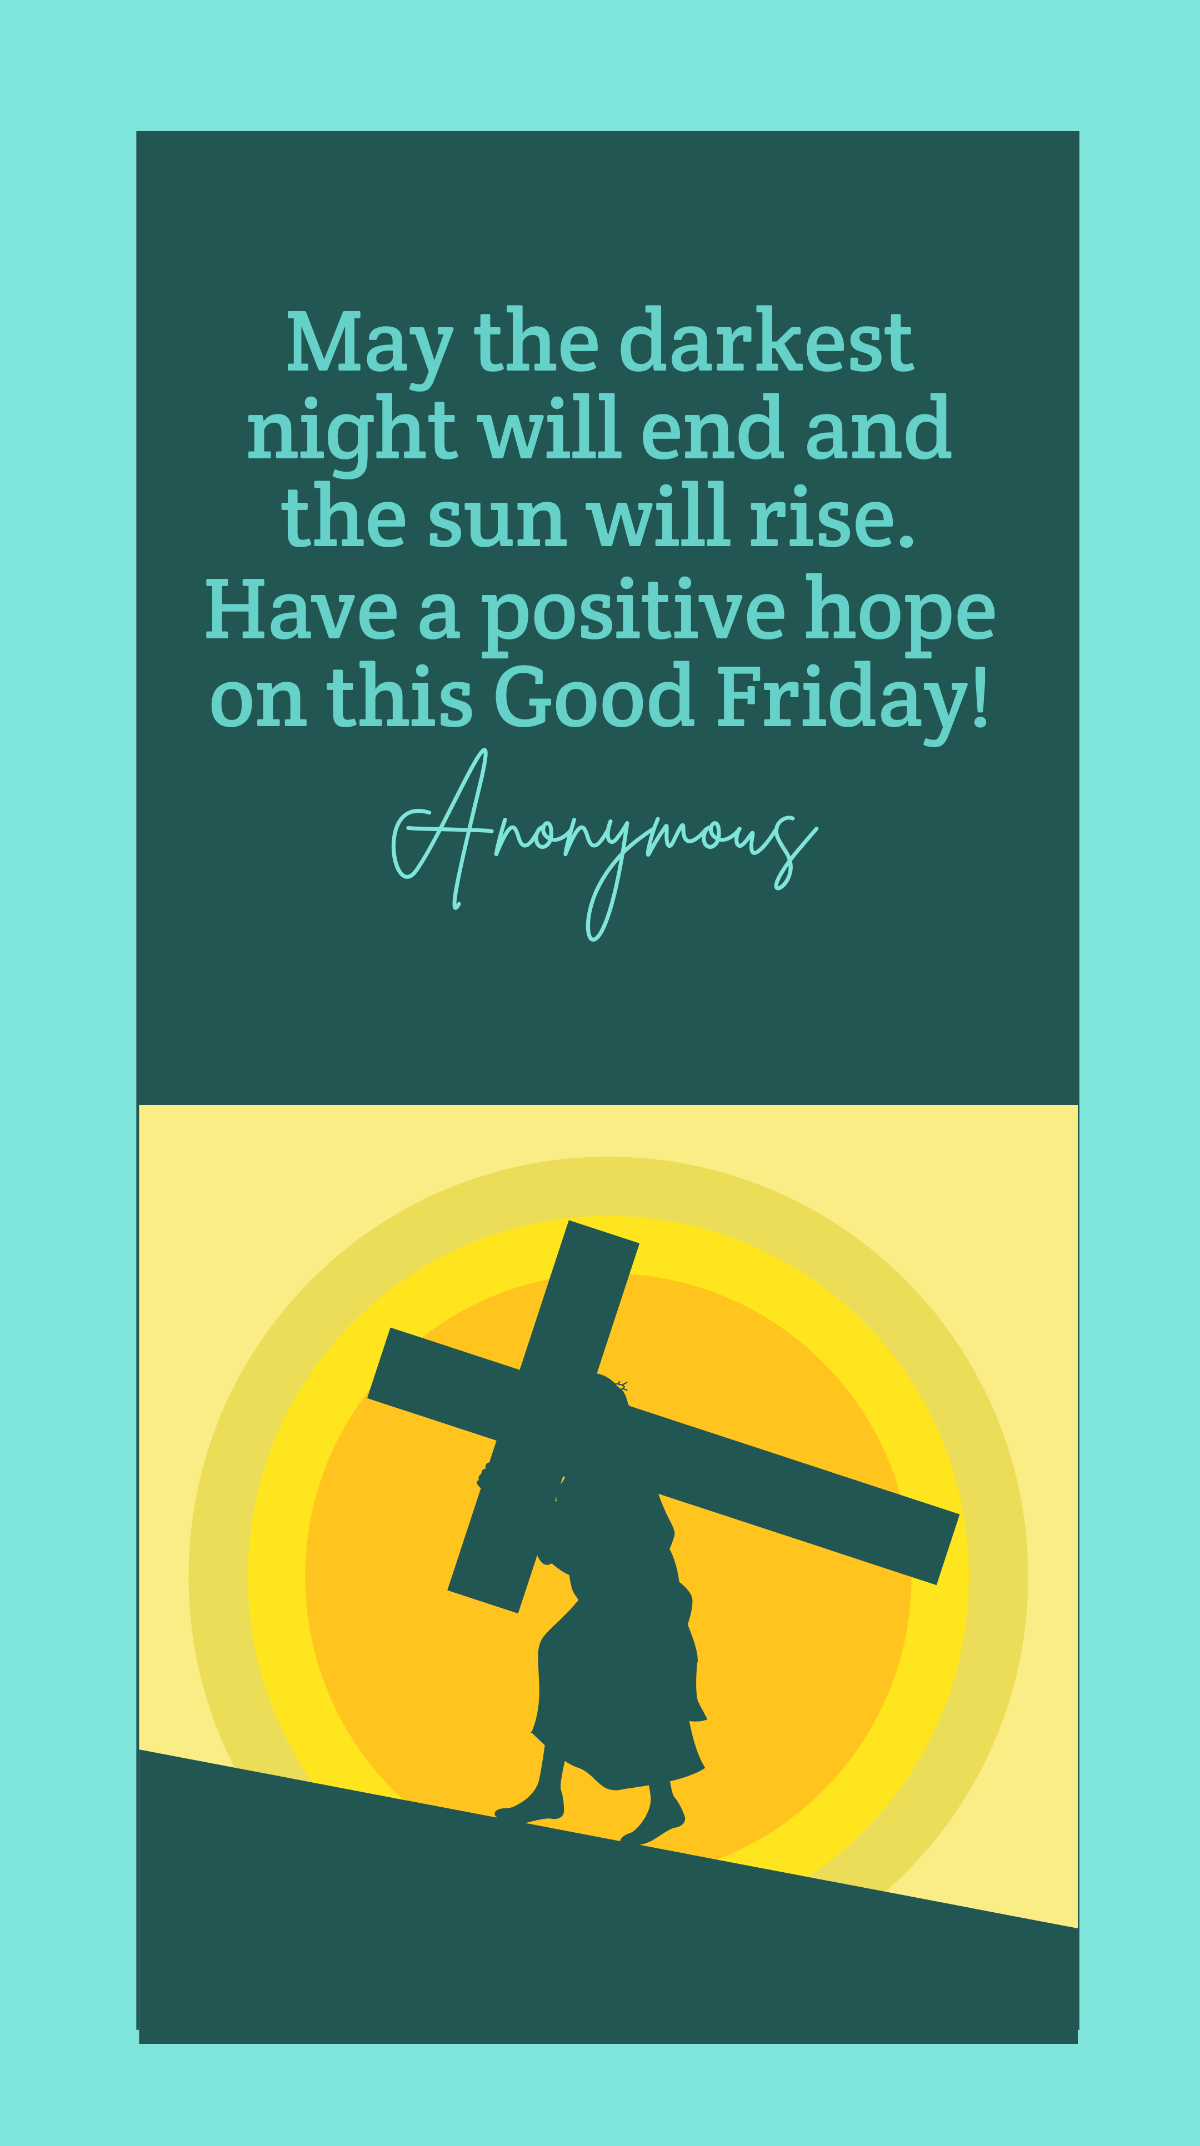 Anonymous - May the darkest night will end and the sun will rise. Have a positive hope on this Good Friday! Template